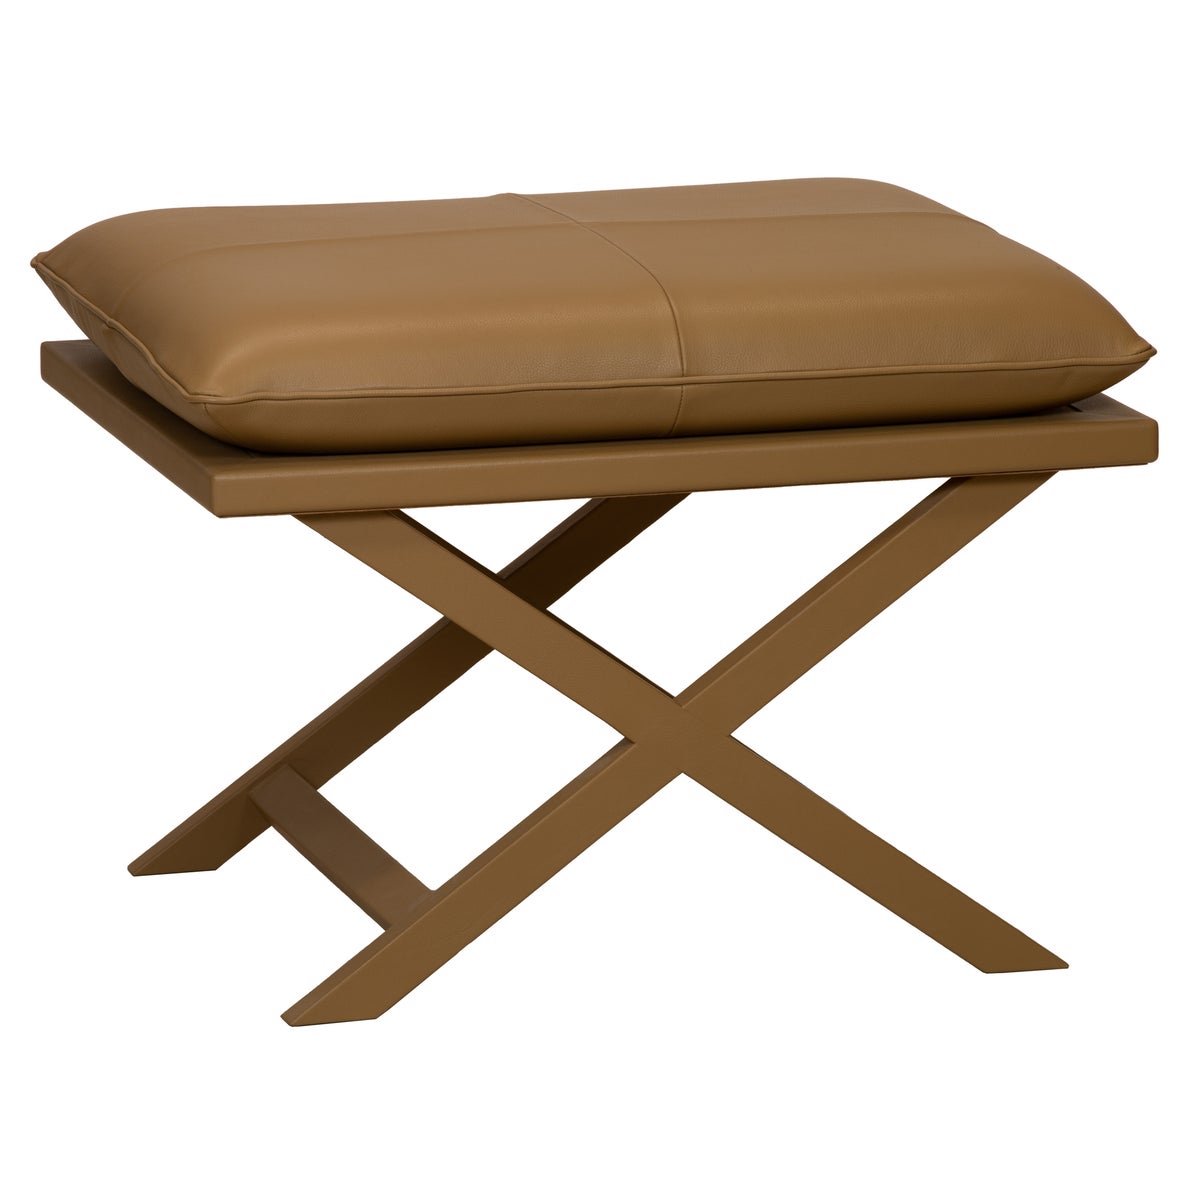 Sonoma Leather Stool in Natural